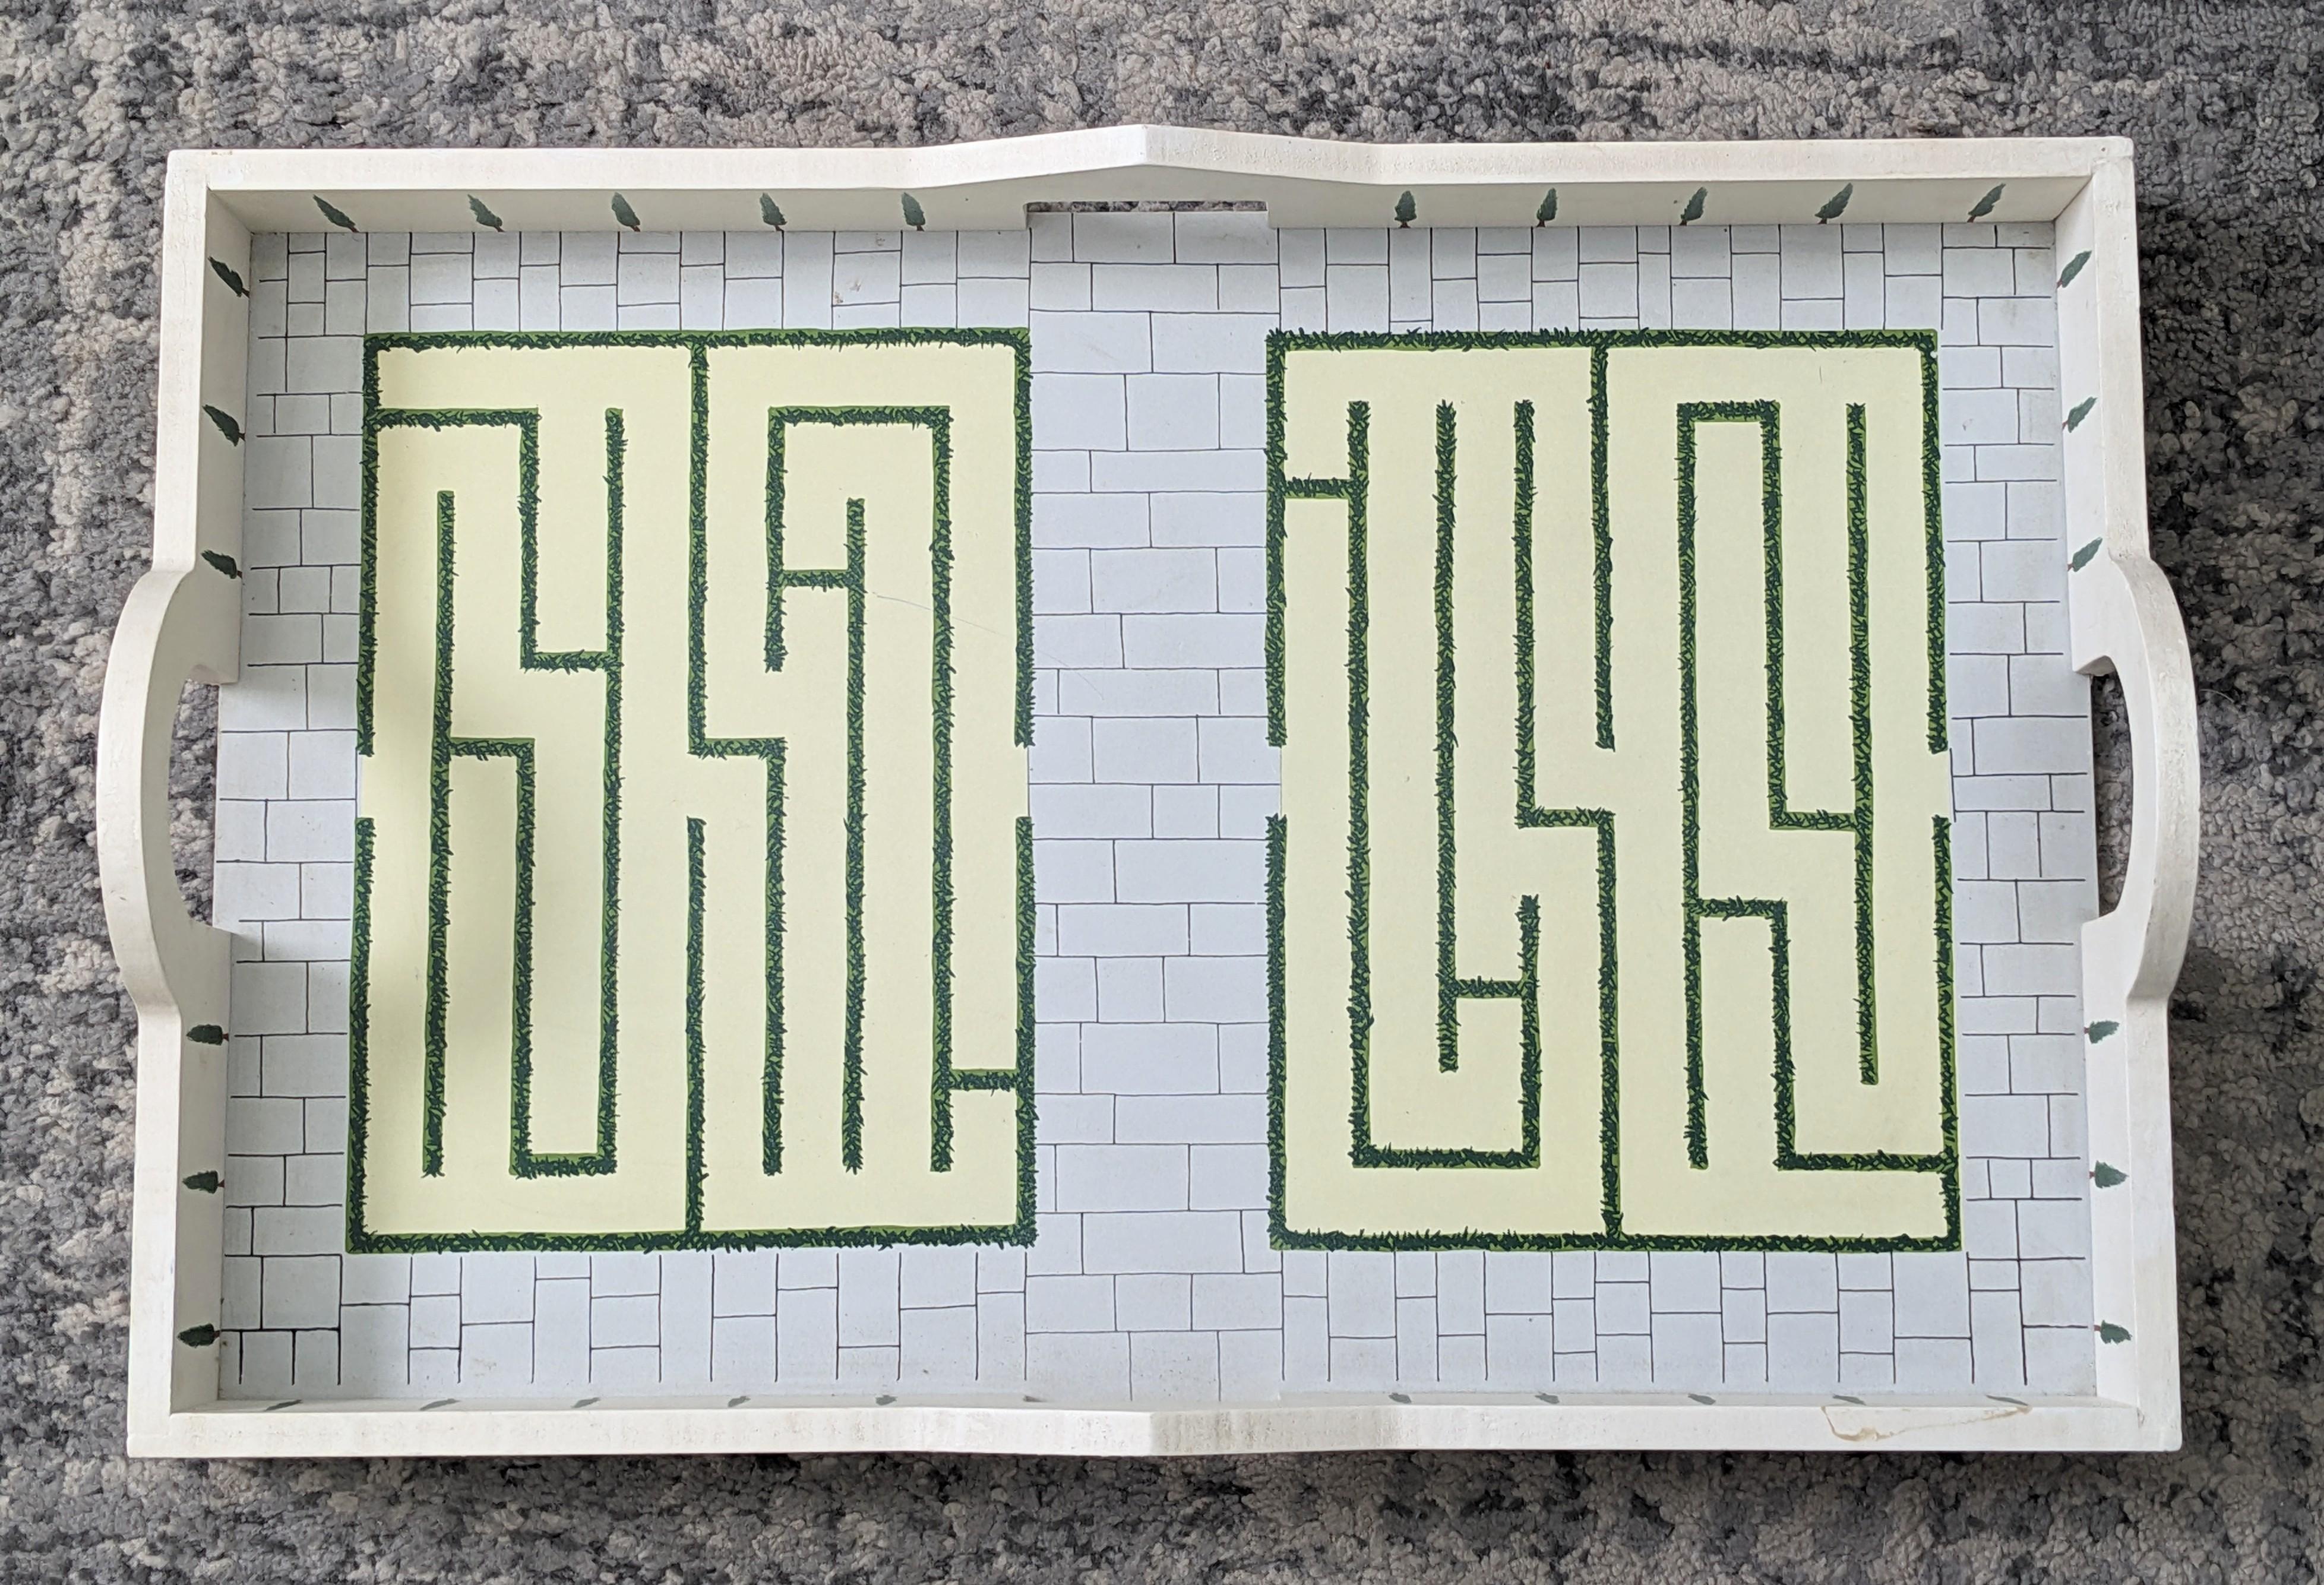 Charming Lithographed Palladian Garden Maze Tray by Justin Terzi for Swid Powell of printed resin over a light weight wood base. Tray 23